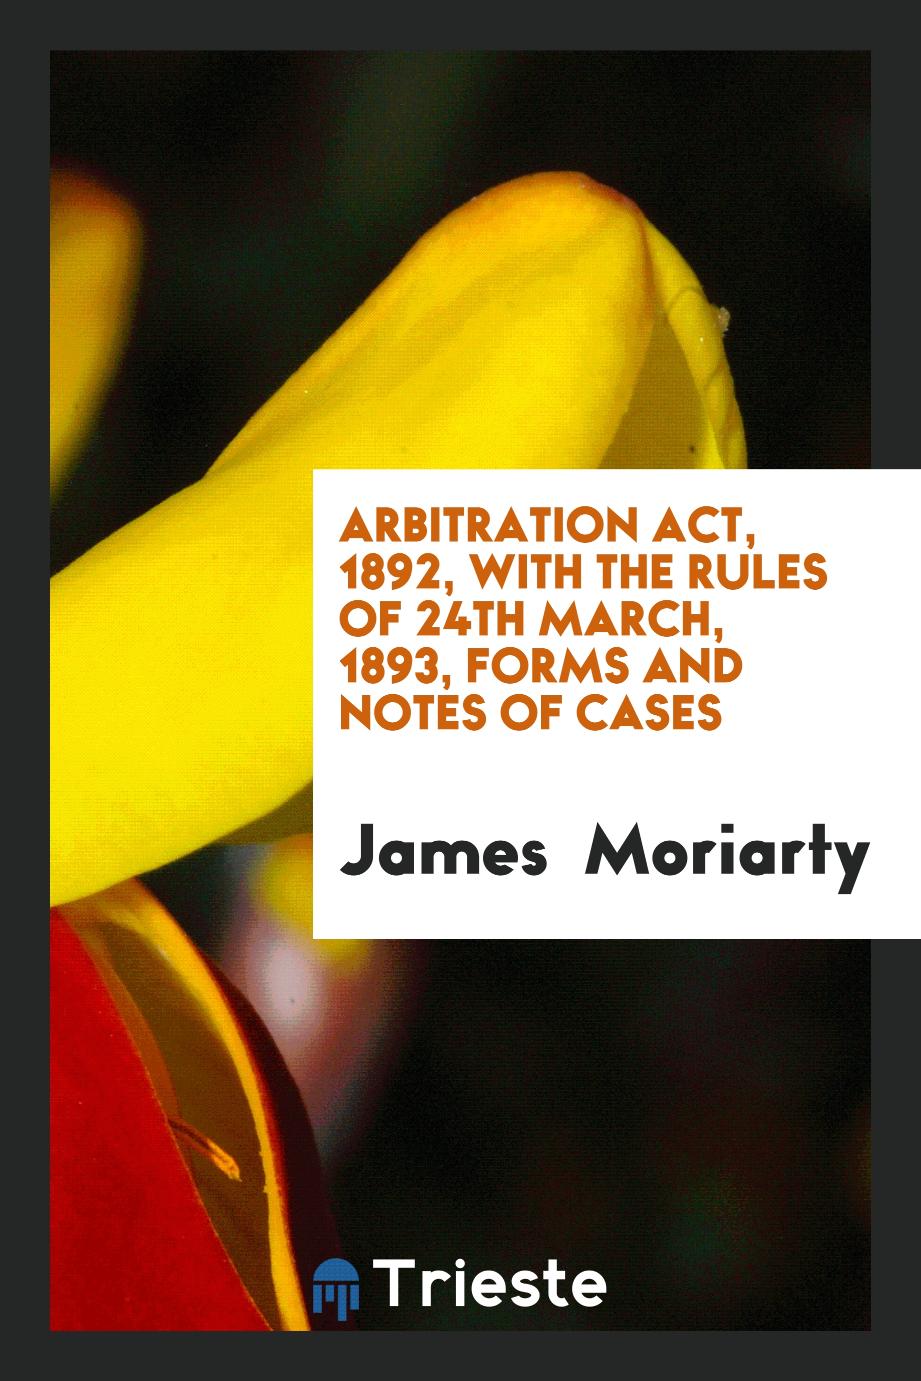 Arbitration Act, 1892, with the Rules of 24th March, 1893, Forms and Notes of Cases